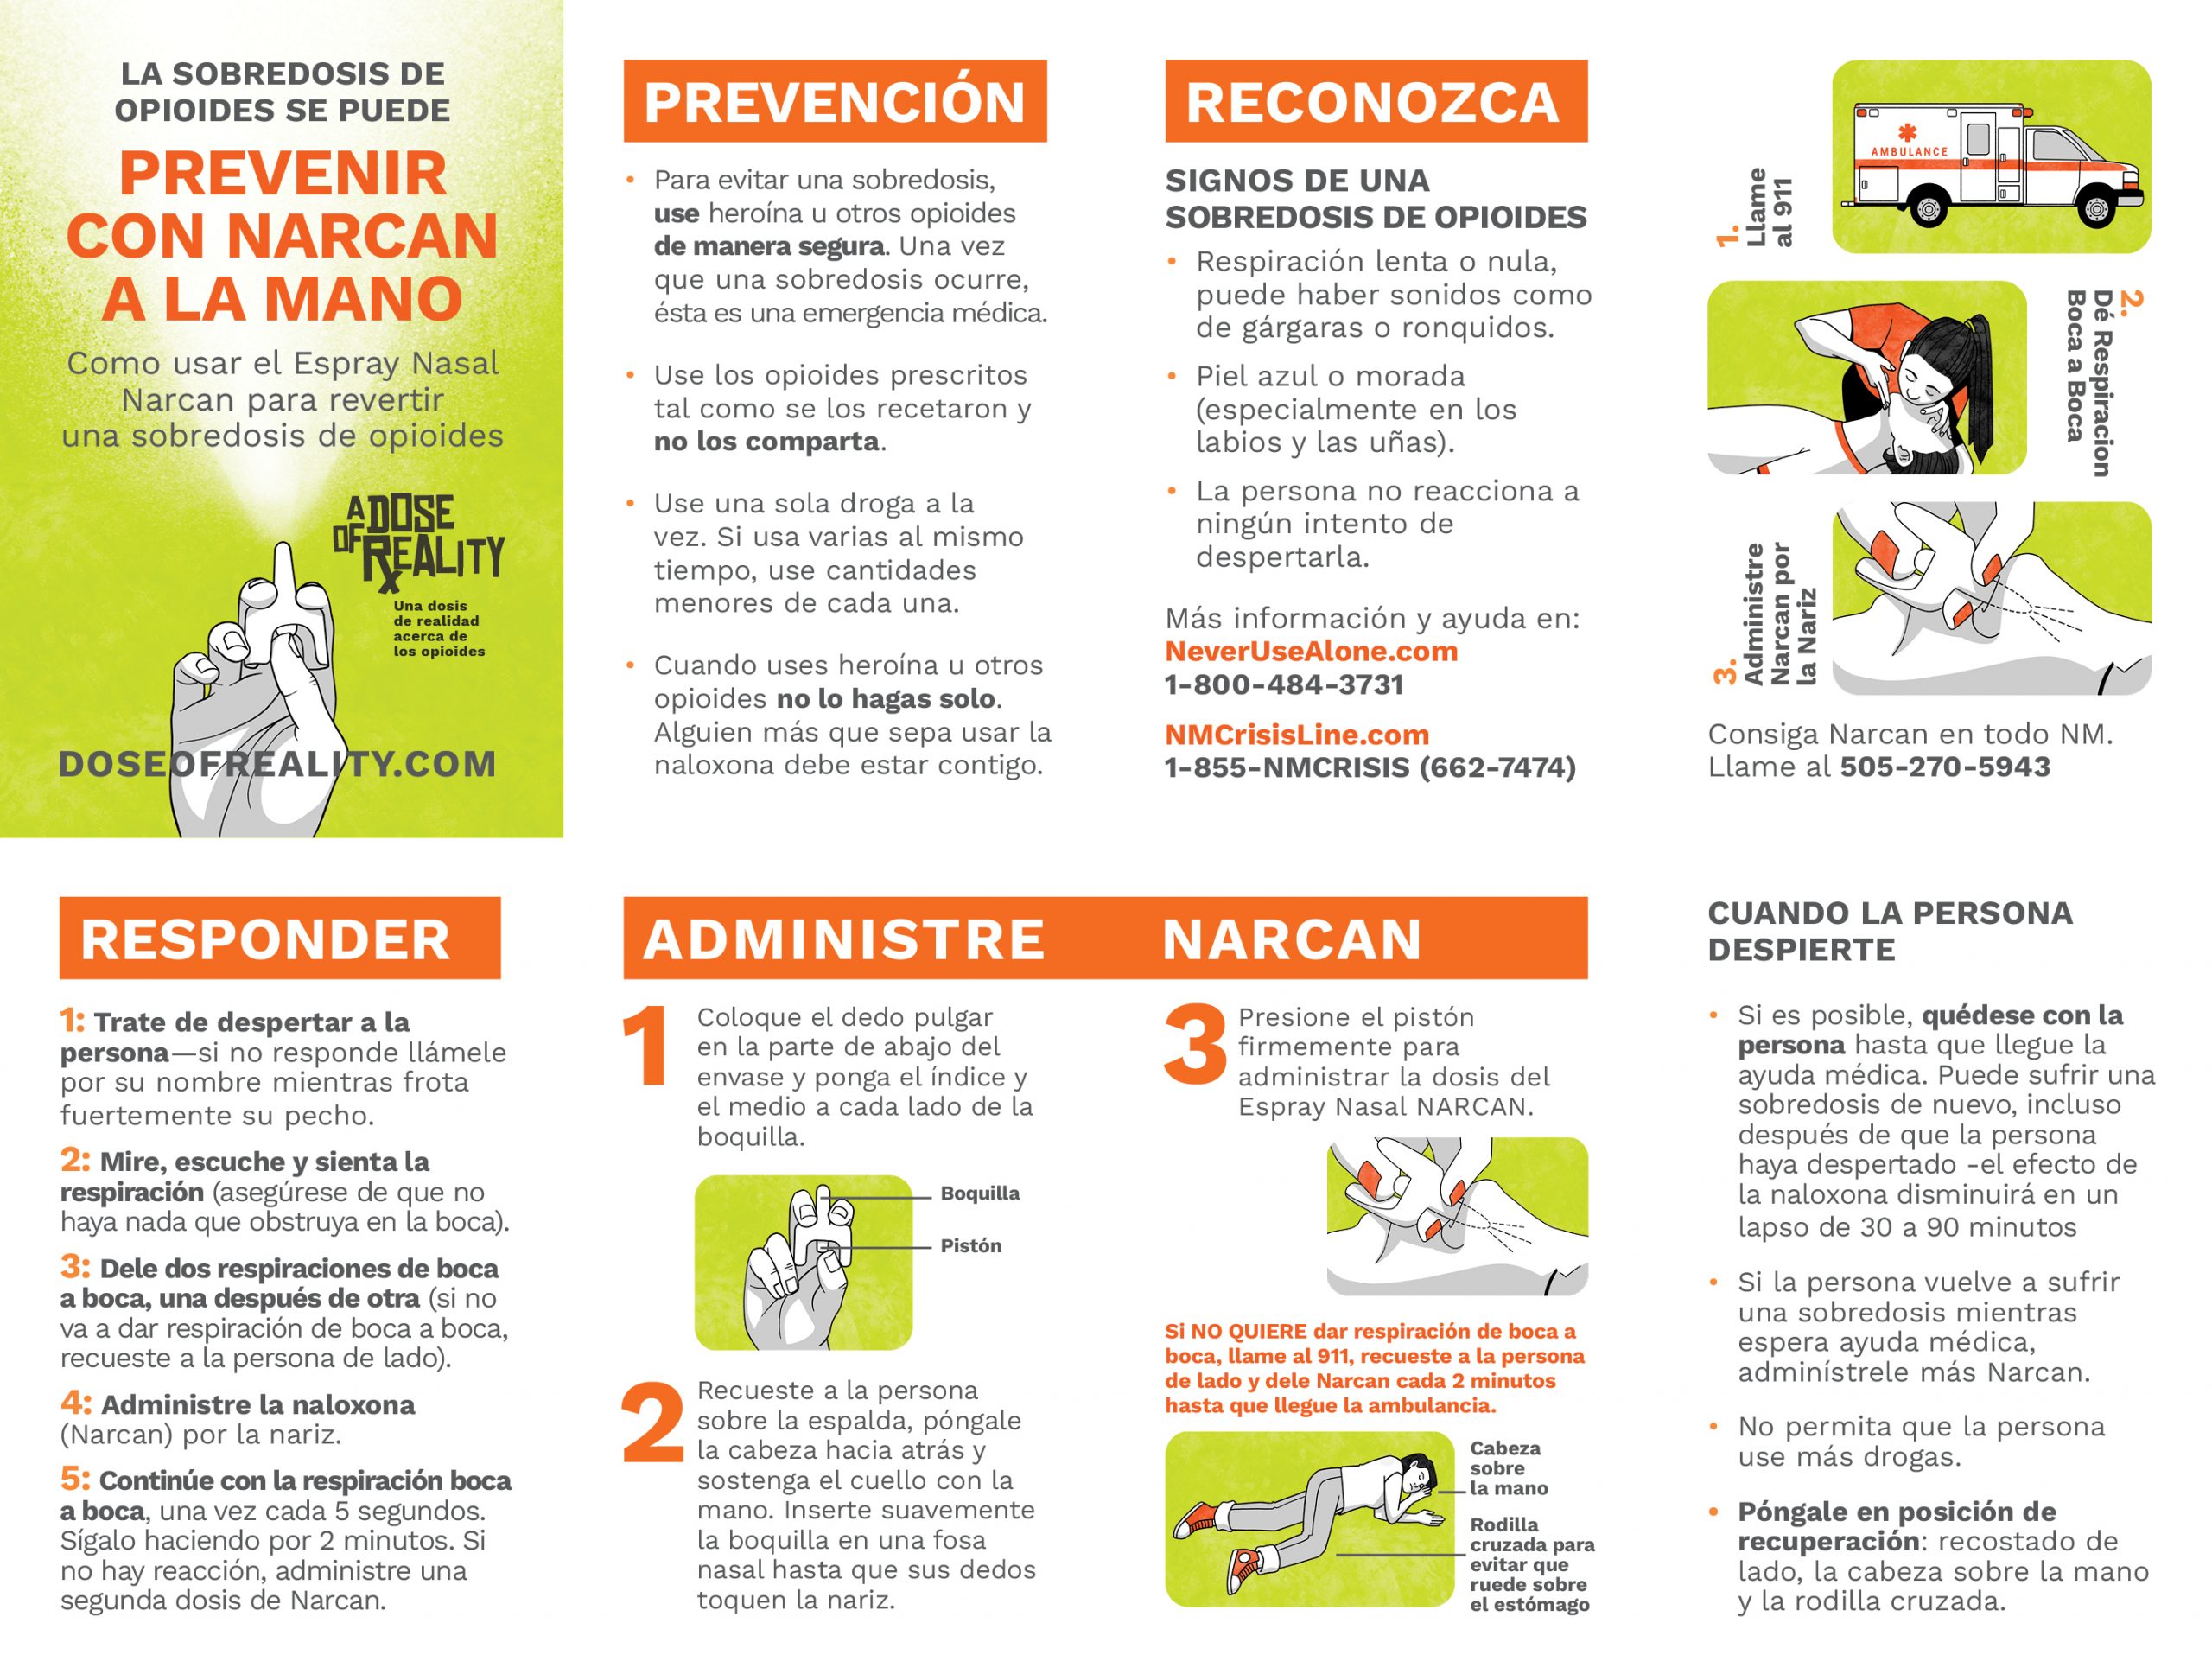 ADOR Narcan Guide Spanish